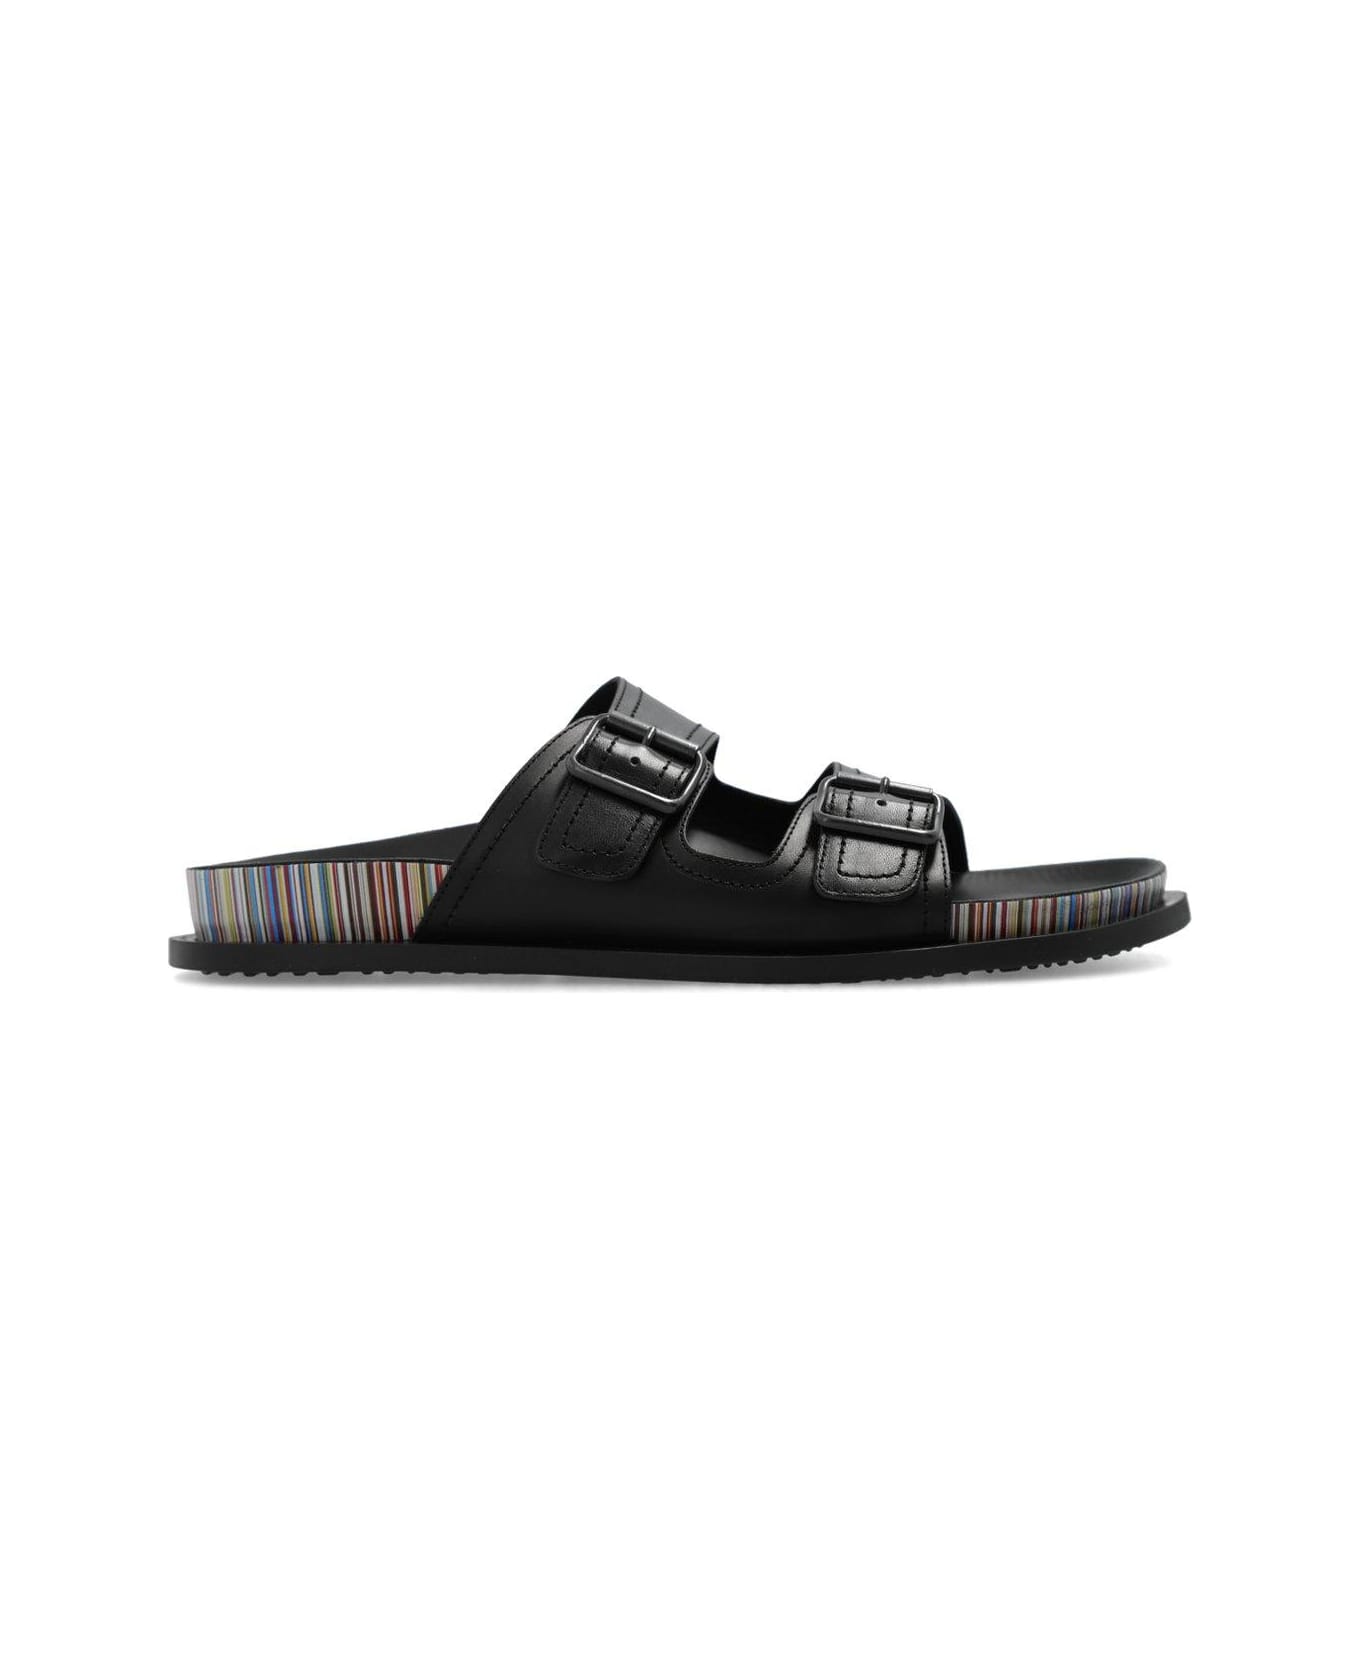 Paul Smith Leather Slides - Black その他各種シューズ